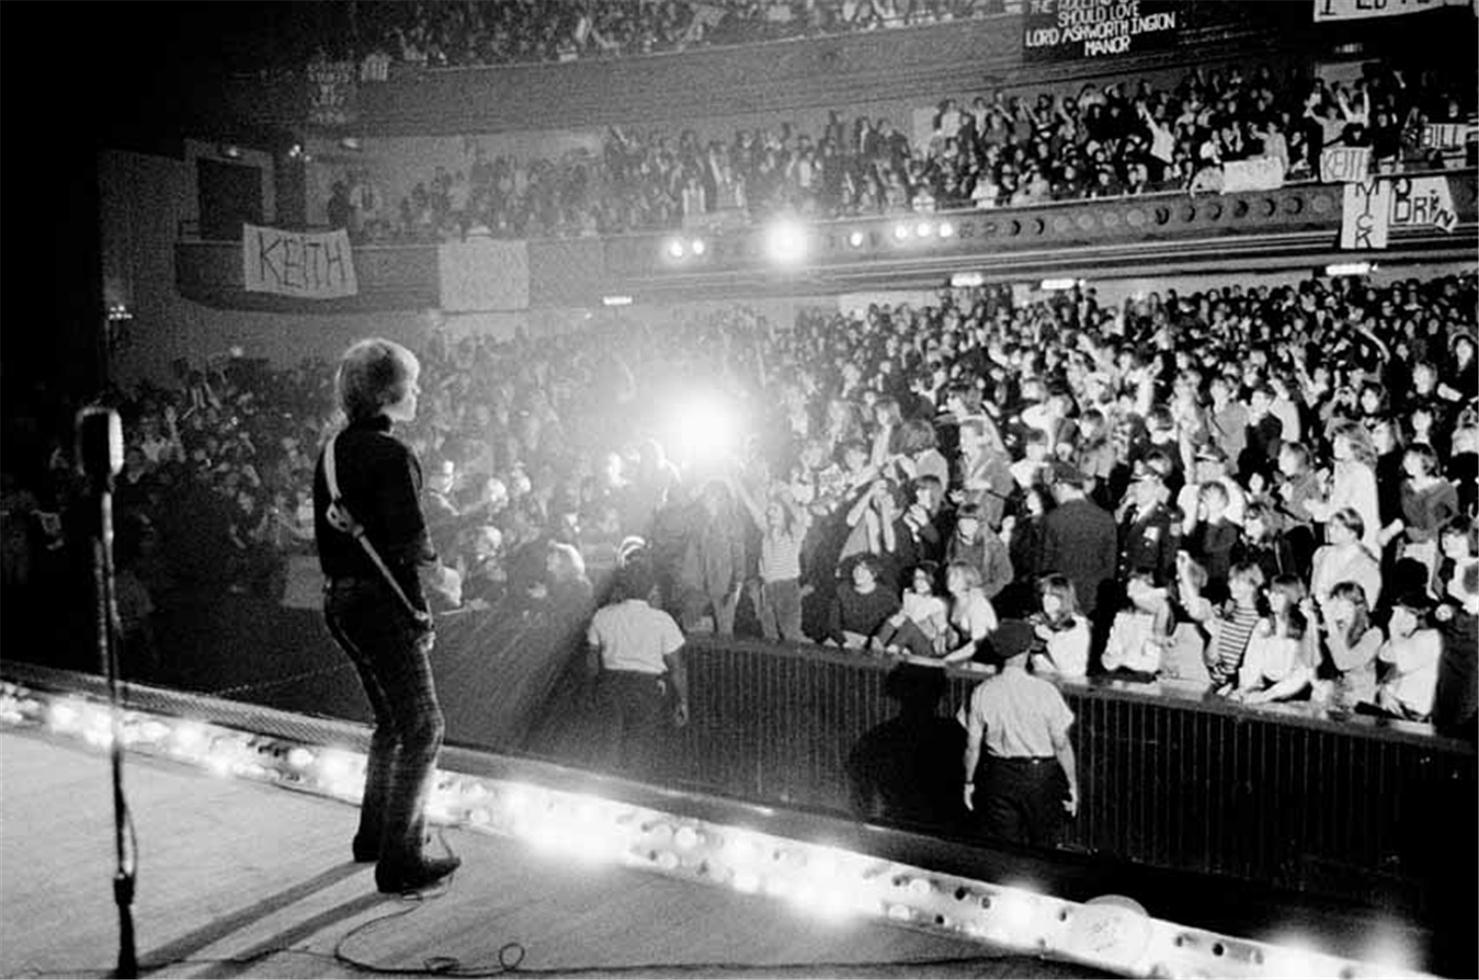 Gered Mankowitz Black and White Photograph - Brian Jones on stage